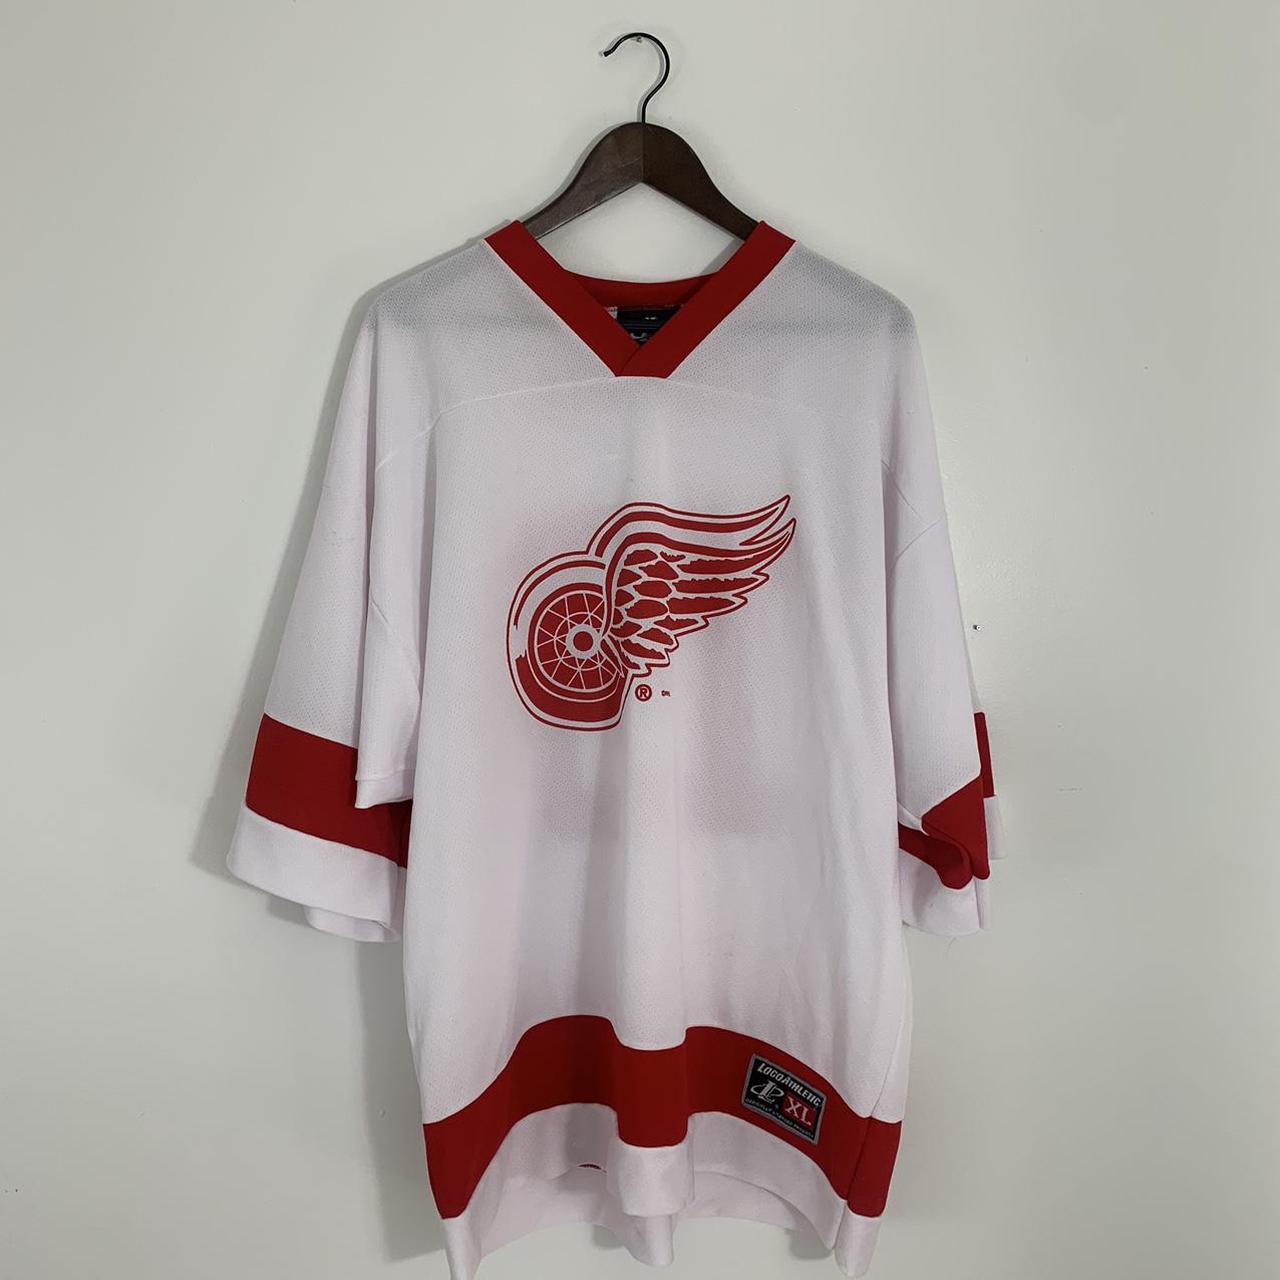 Detroit Red Wings NHL Sweater Crewneck USA Vintage 90s Hockey Size XL